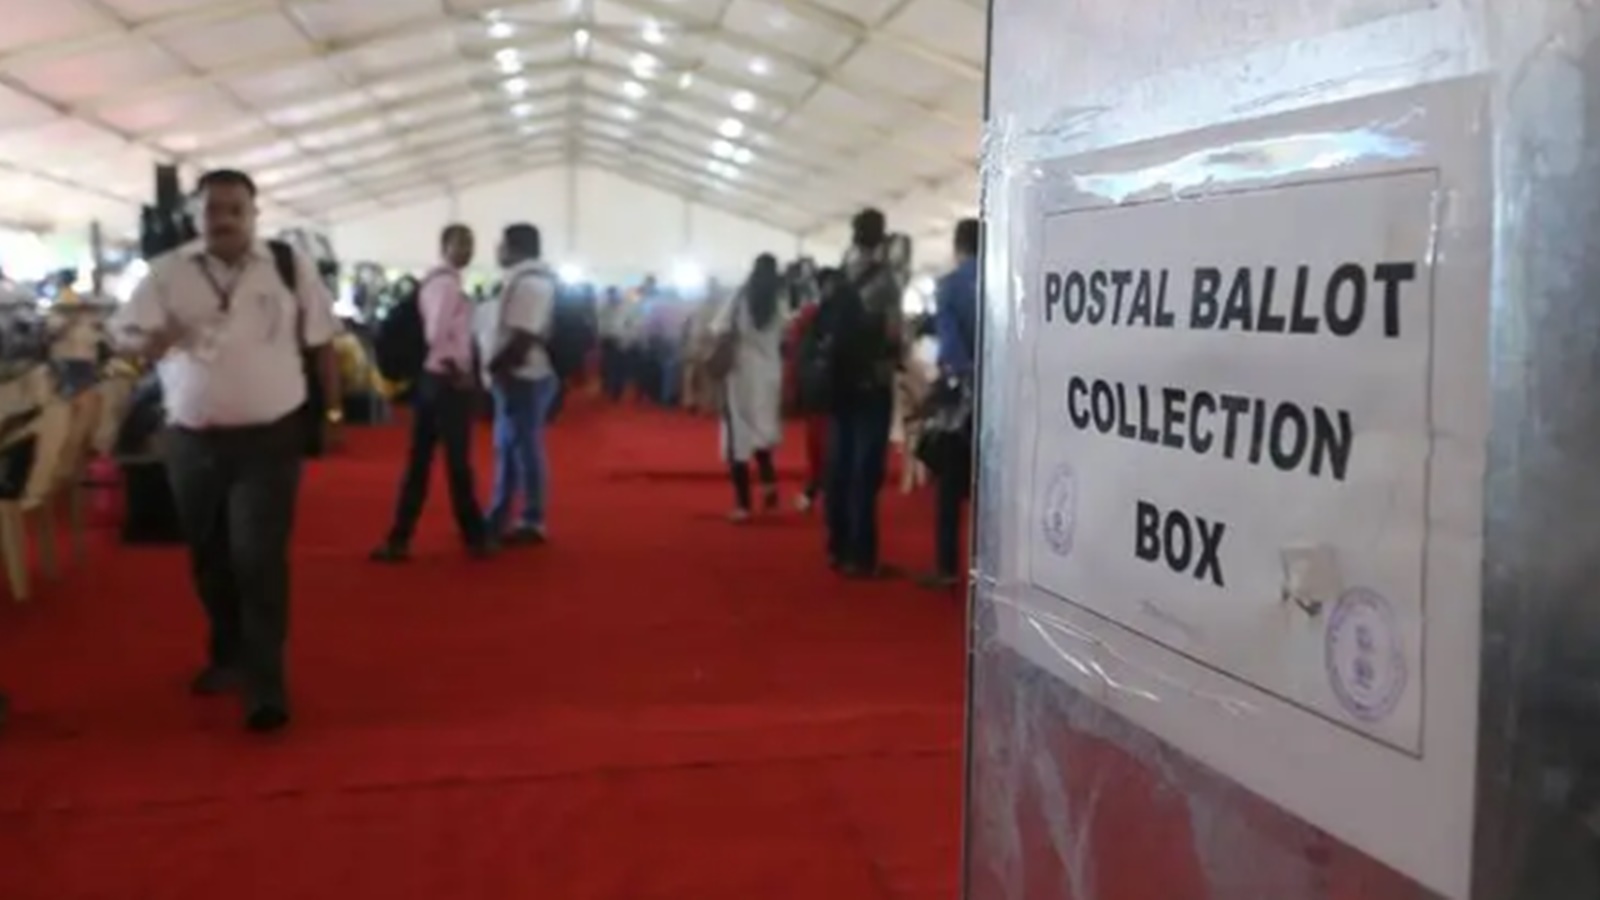 Govt amends rules to allow postal ballots for those aged 85 or above, not  80-plus | Elections News - The Indian Express